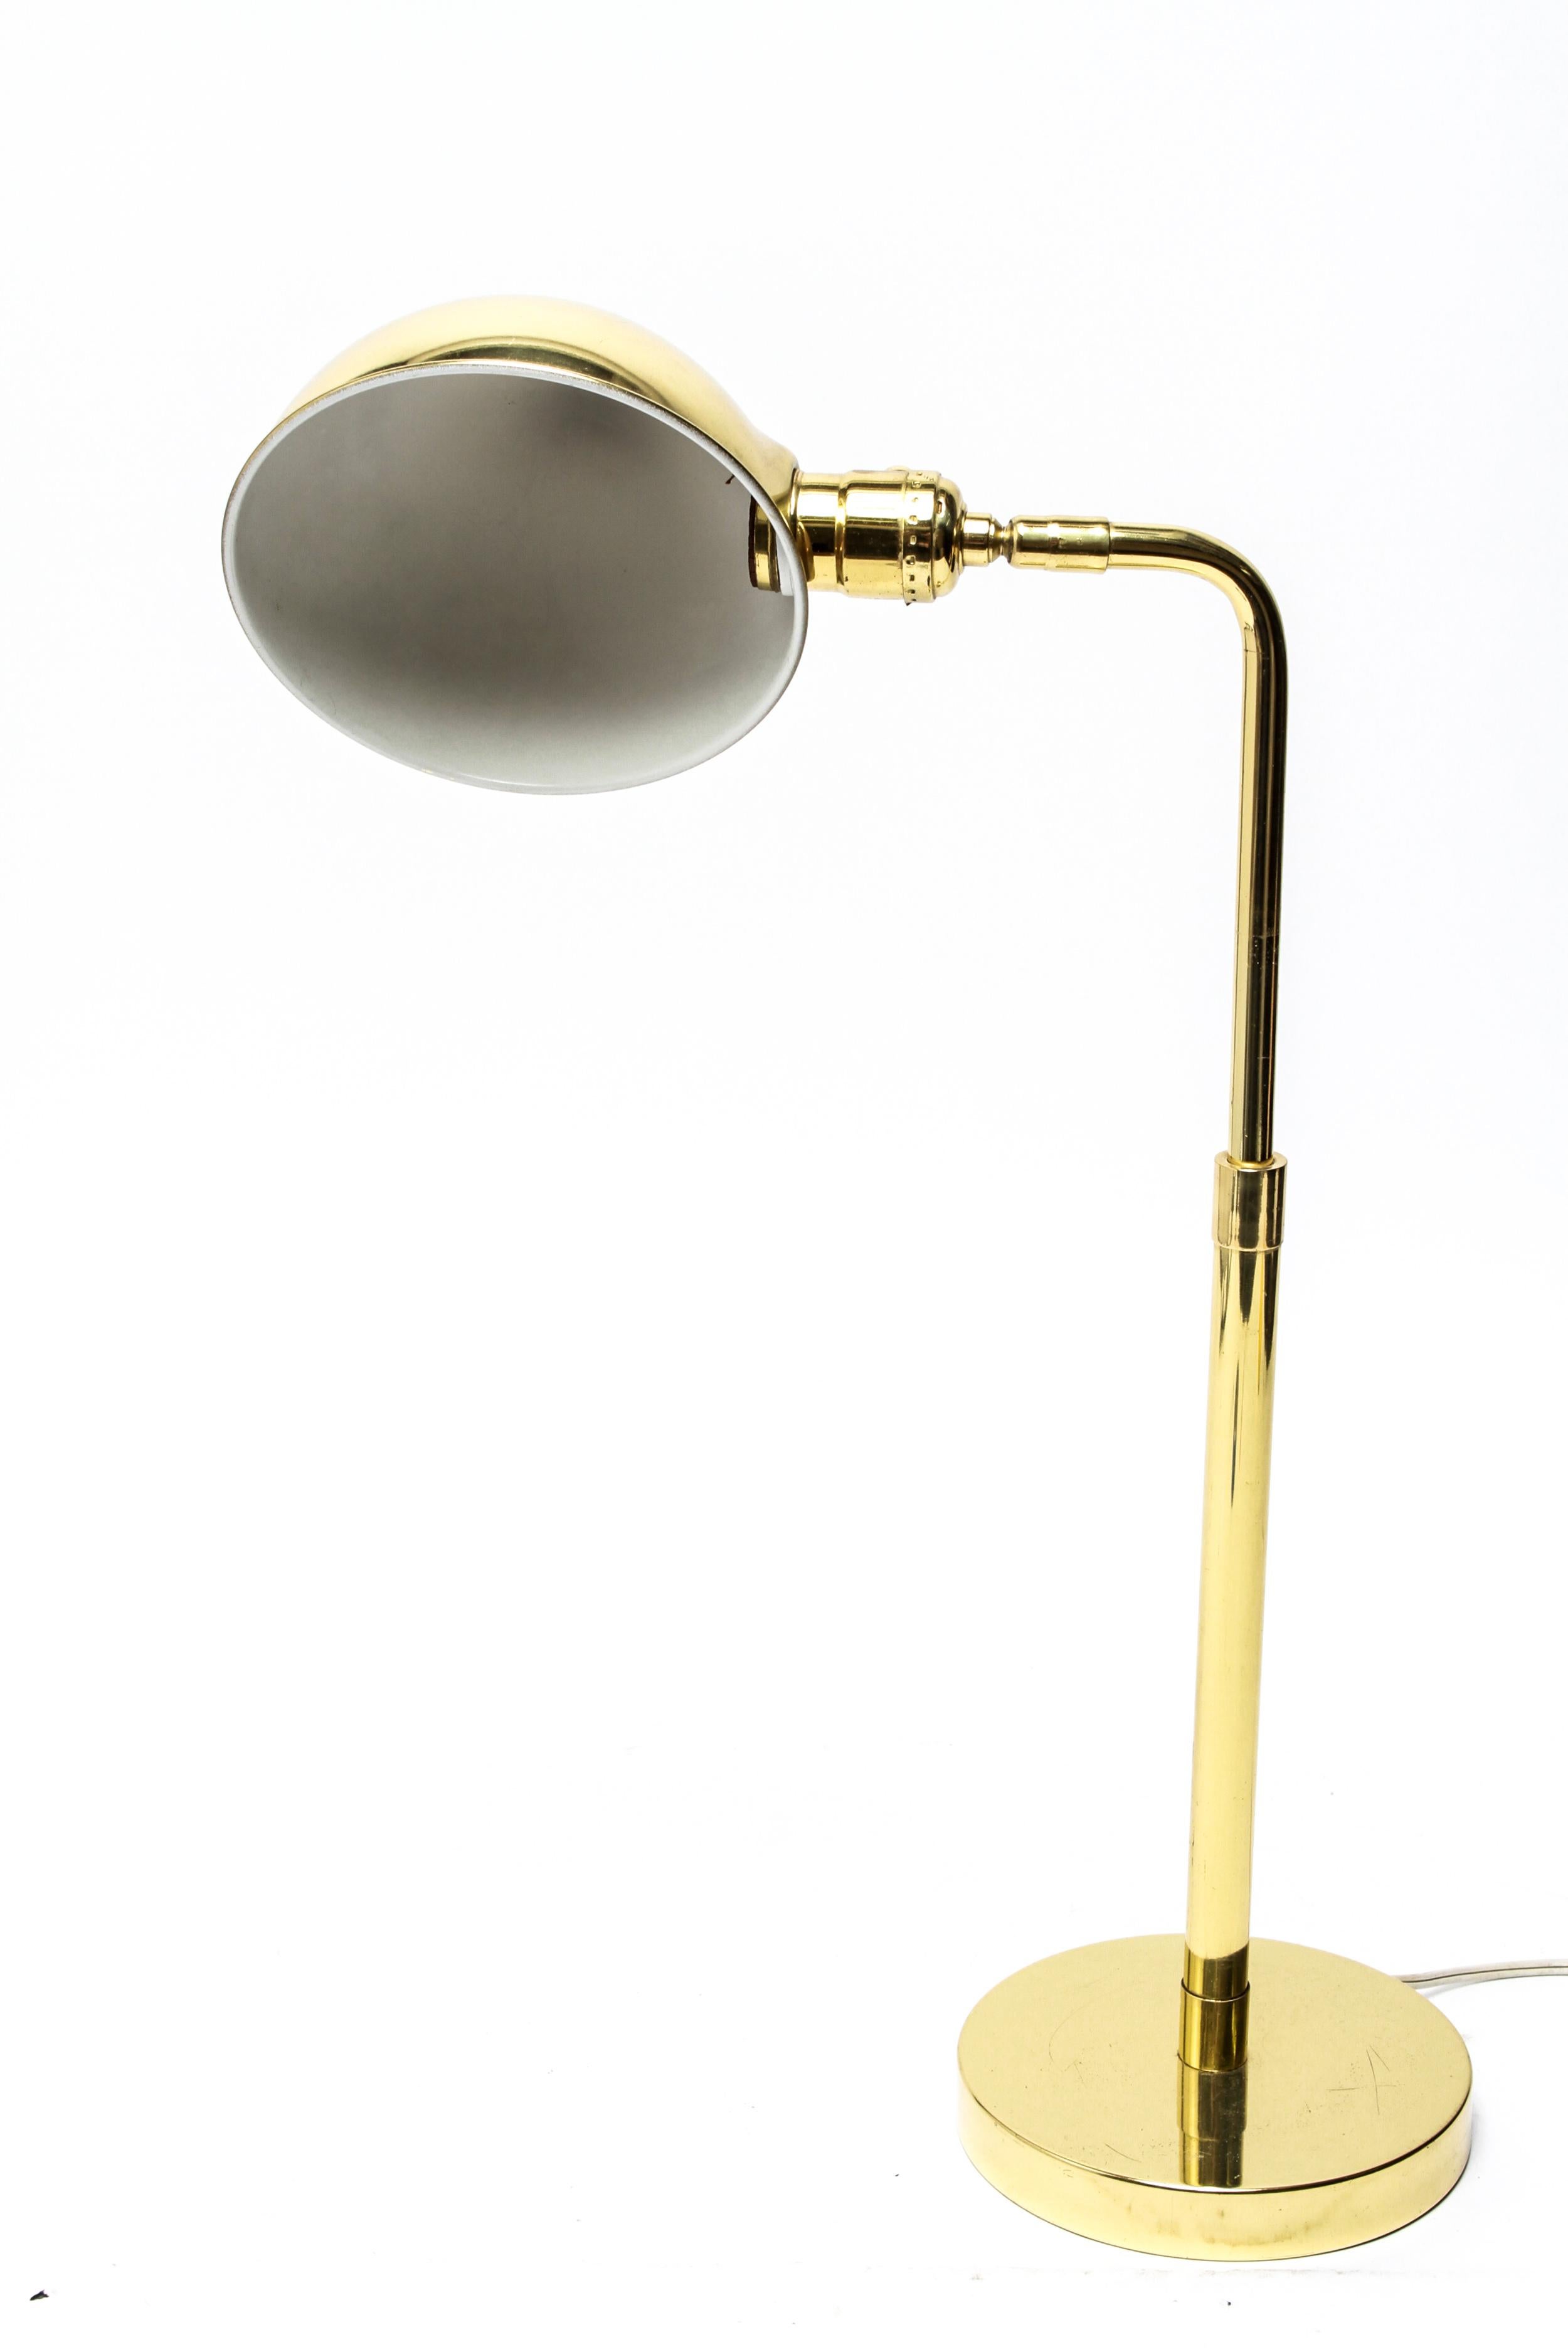 Mid-Century Modern polished brass table lamp or desk lamp with a dome demilune shade. The shade interior bears a partial label. The height of the lamp can extend. In great vintage condition with age-appropriate wear.